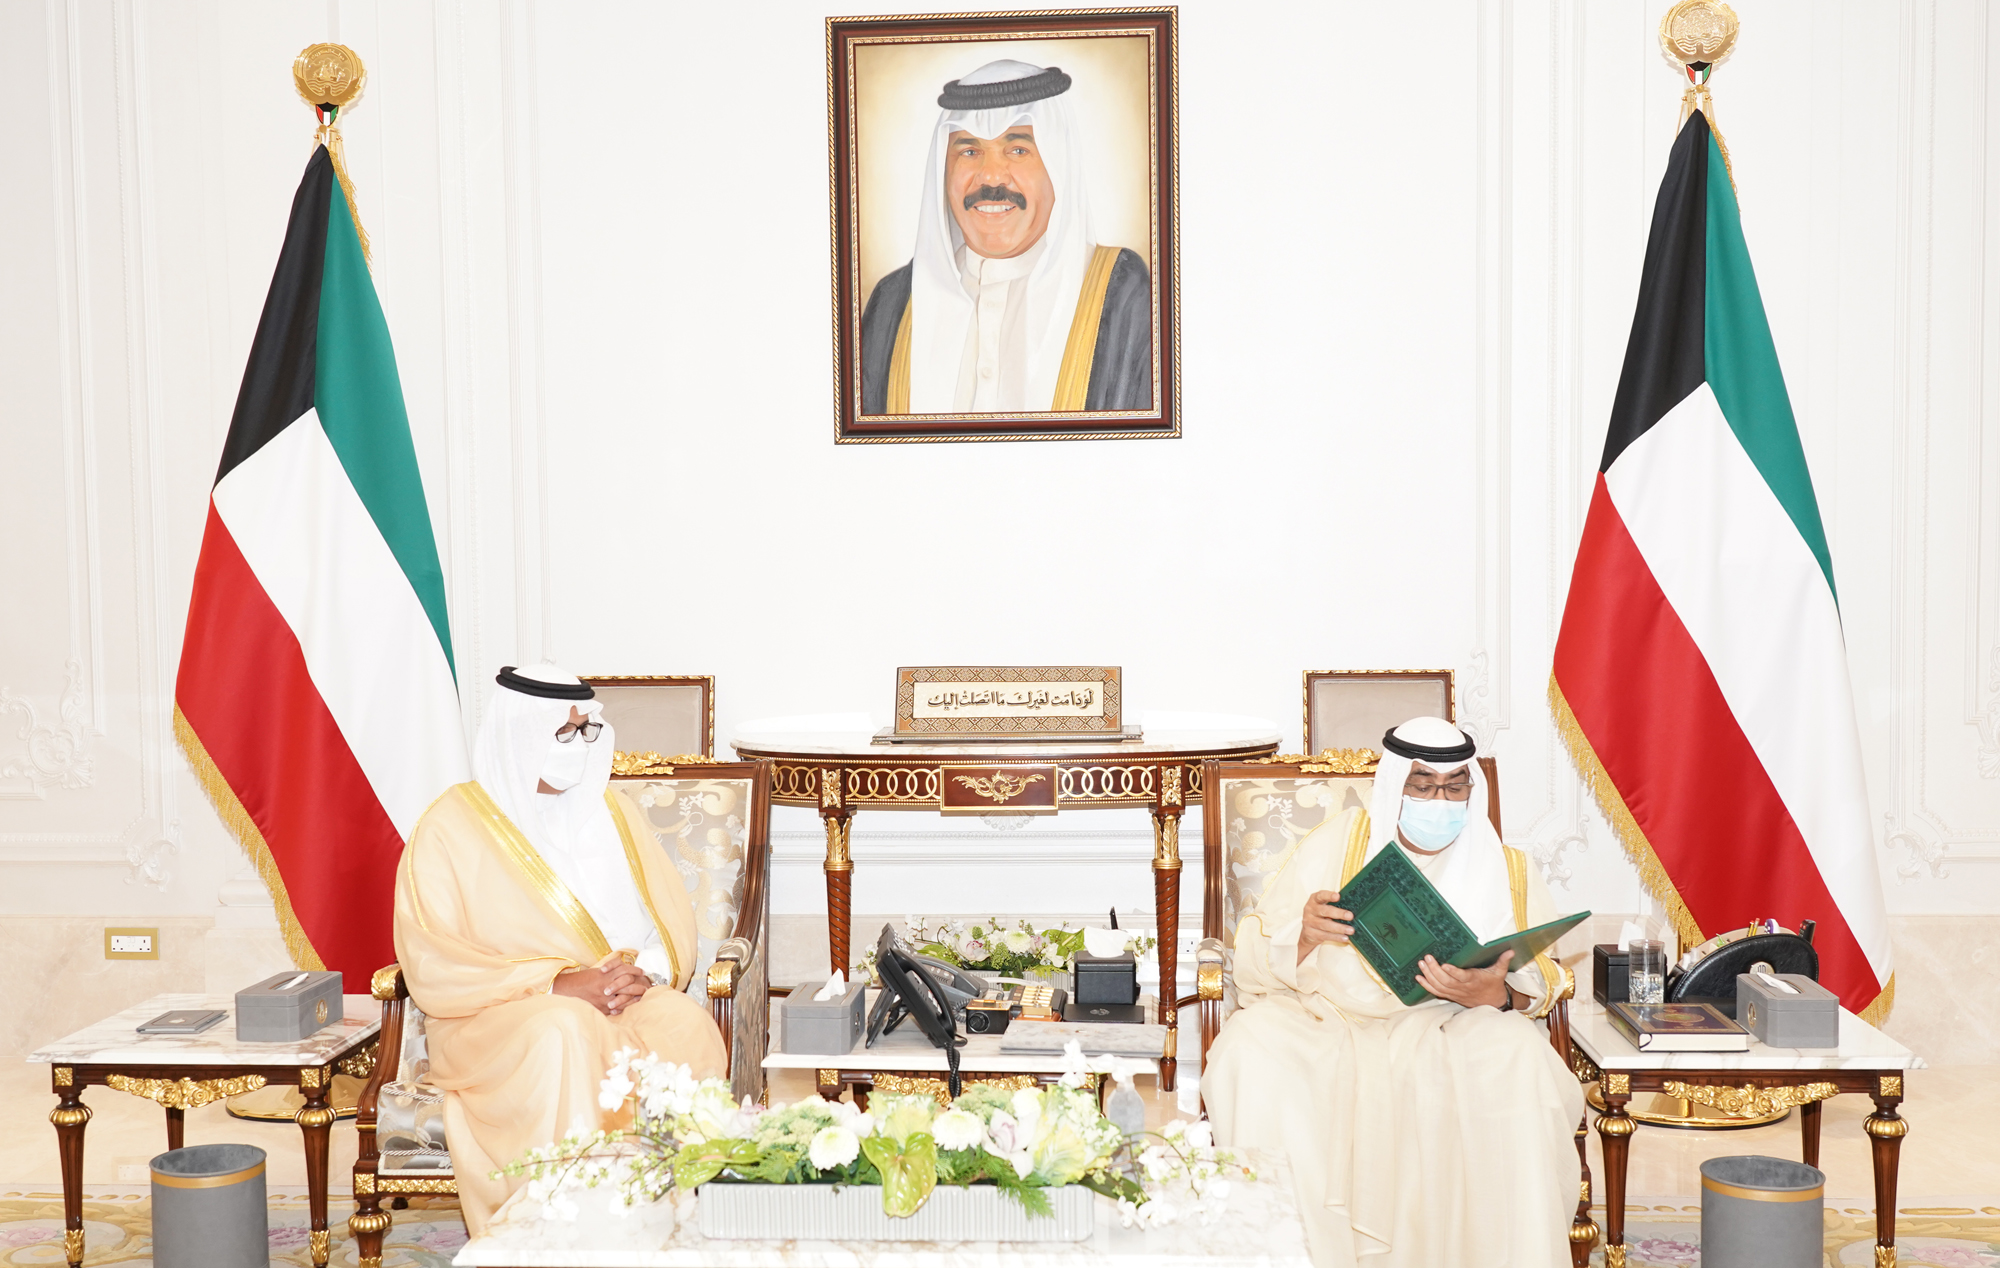 HH the Crown Prince received a letter from his Saudi counterpart handed to him by Prince Sultan bin Saad Al-Saud